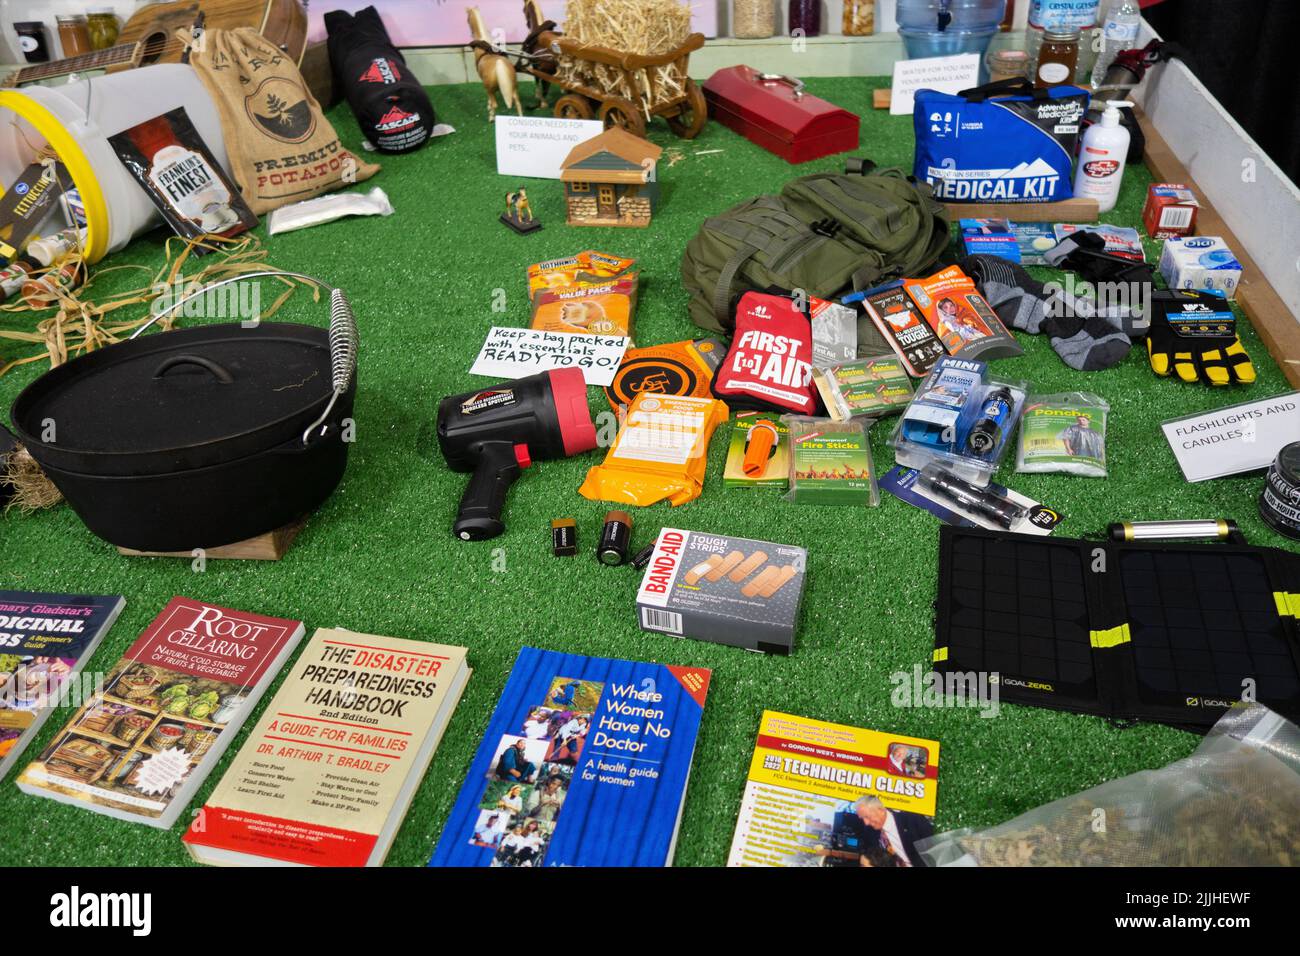 A display on emergency preparedness, at the Lane County Fair in Eugene, Oregon. Stock Photo